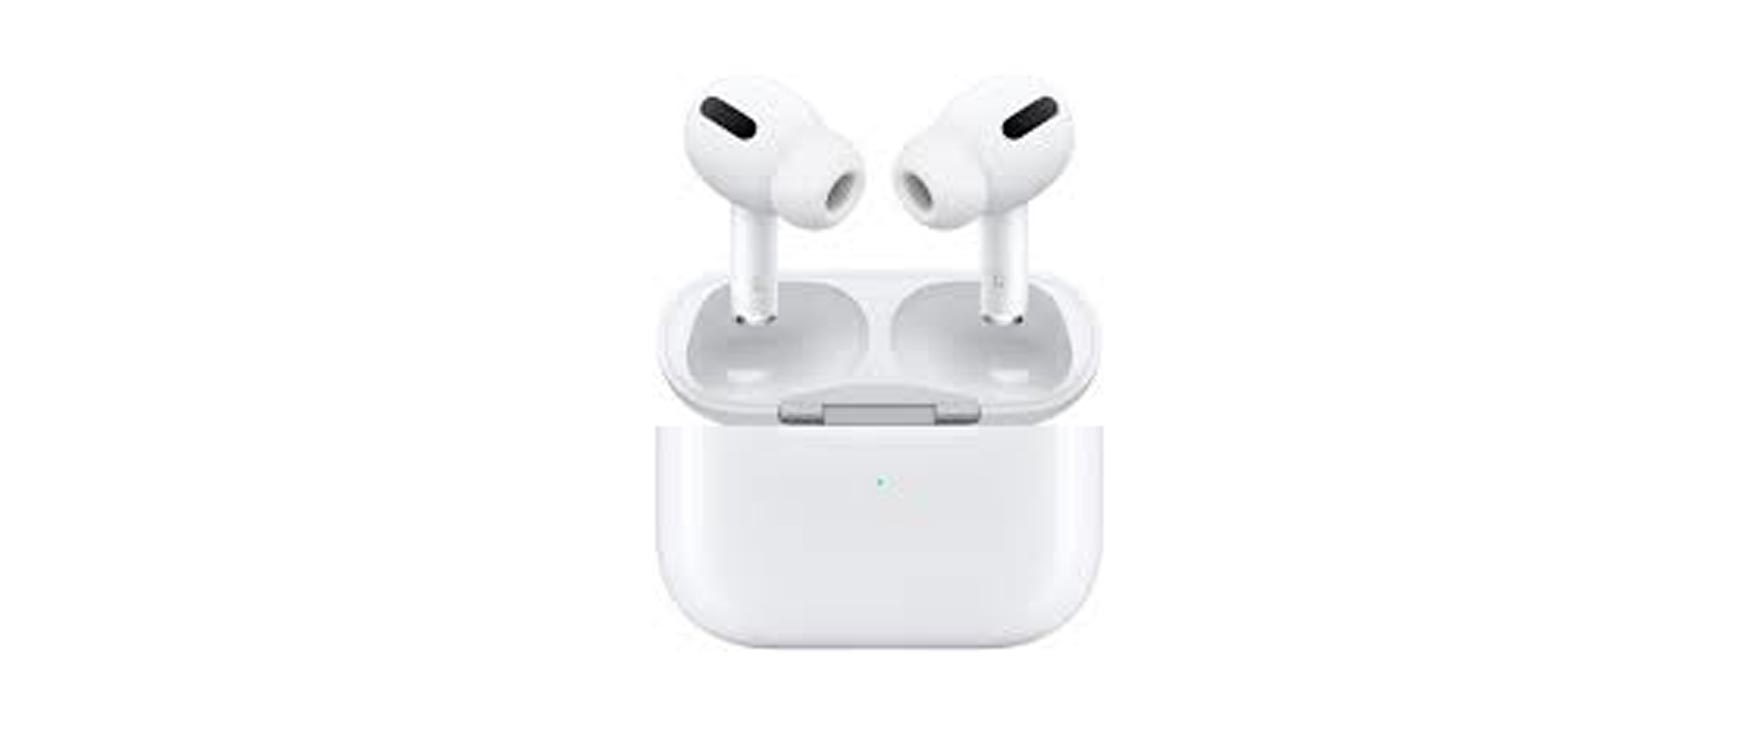 4. Apple AirPods Pro